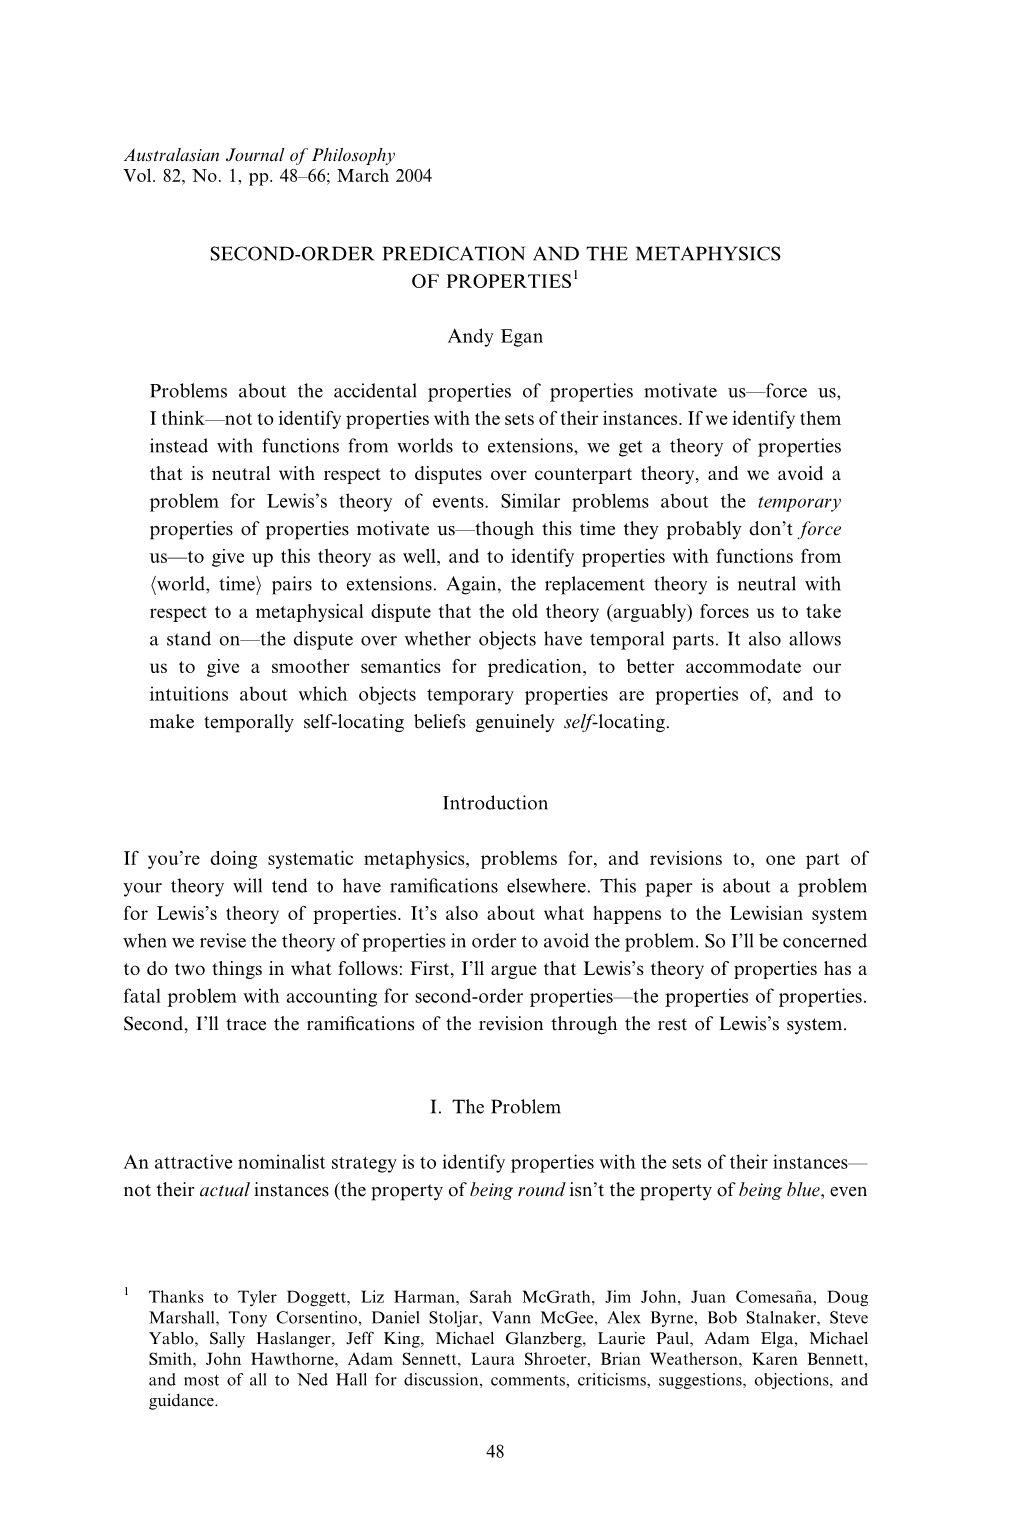 SECOND-ORDER PREDICATION and the METAPHYSICS of PROPERTIES1 Andy Egan Problems About the Accidental Properties of Properties